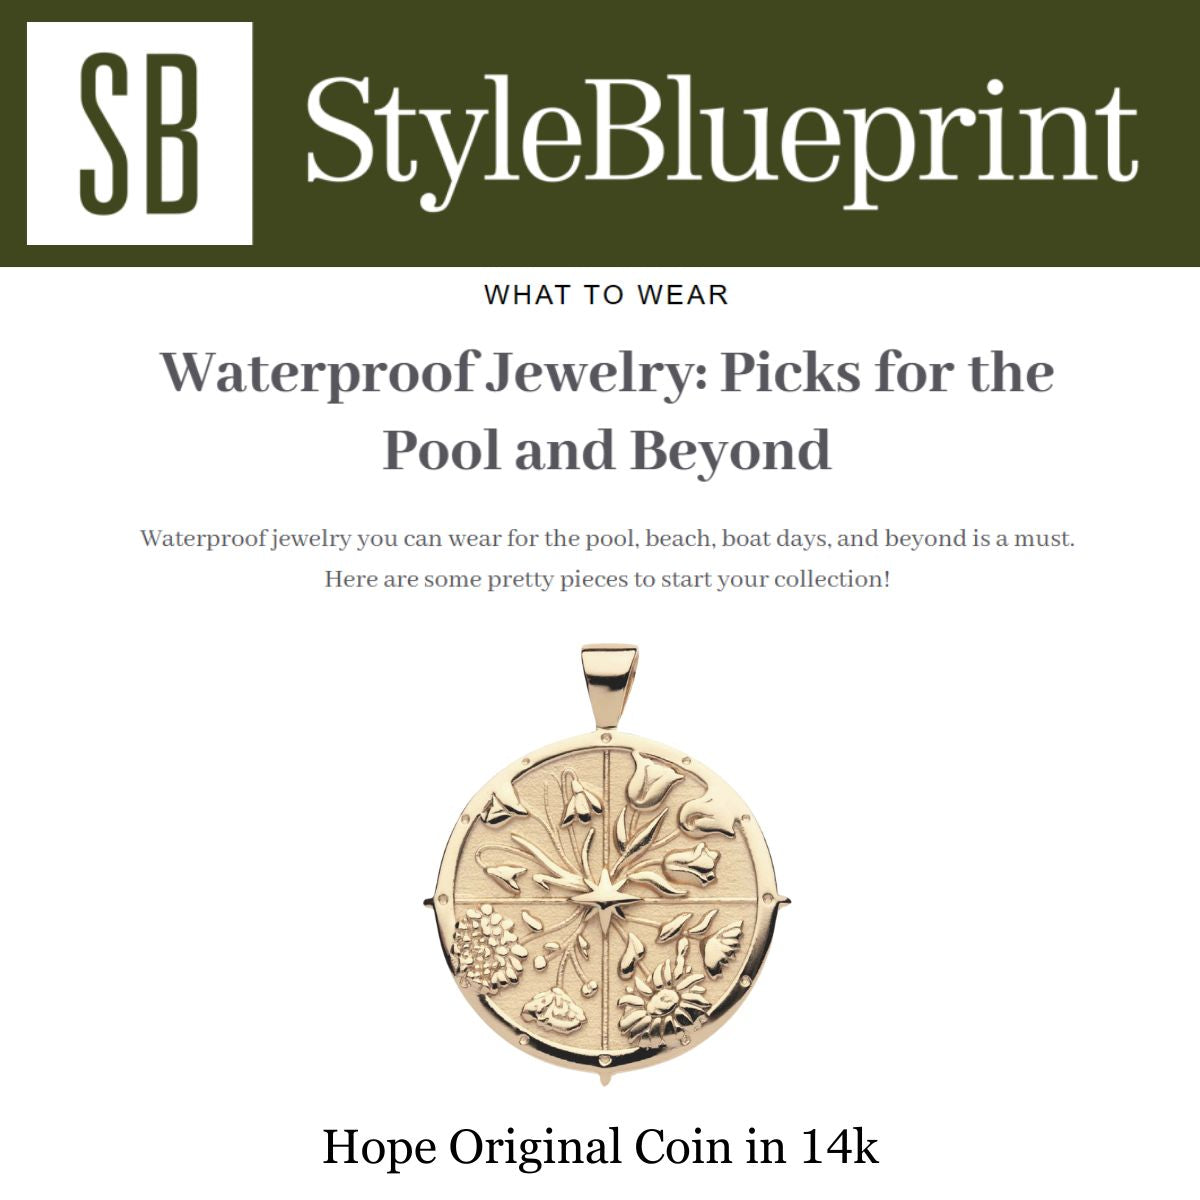 Press Highlight: Style Blue Print's "Waterproof Jewelry: Picks for the Pool and Beyond"